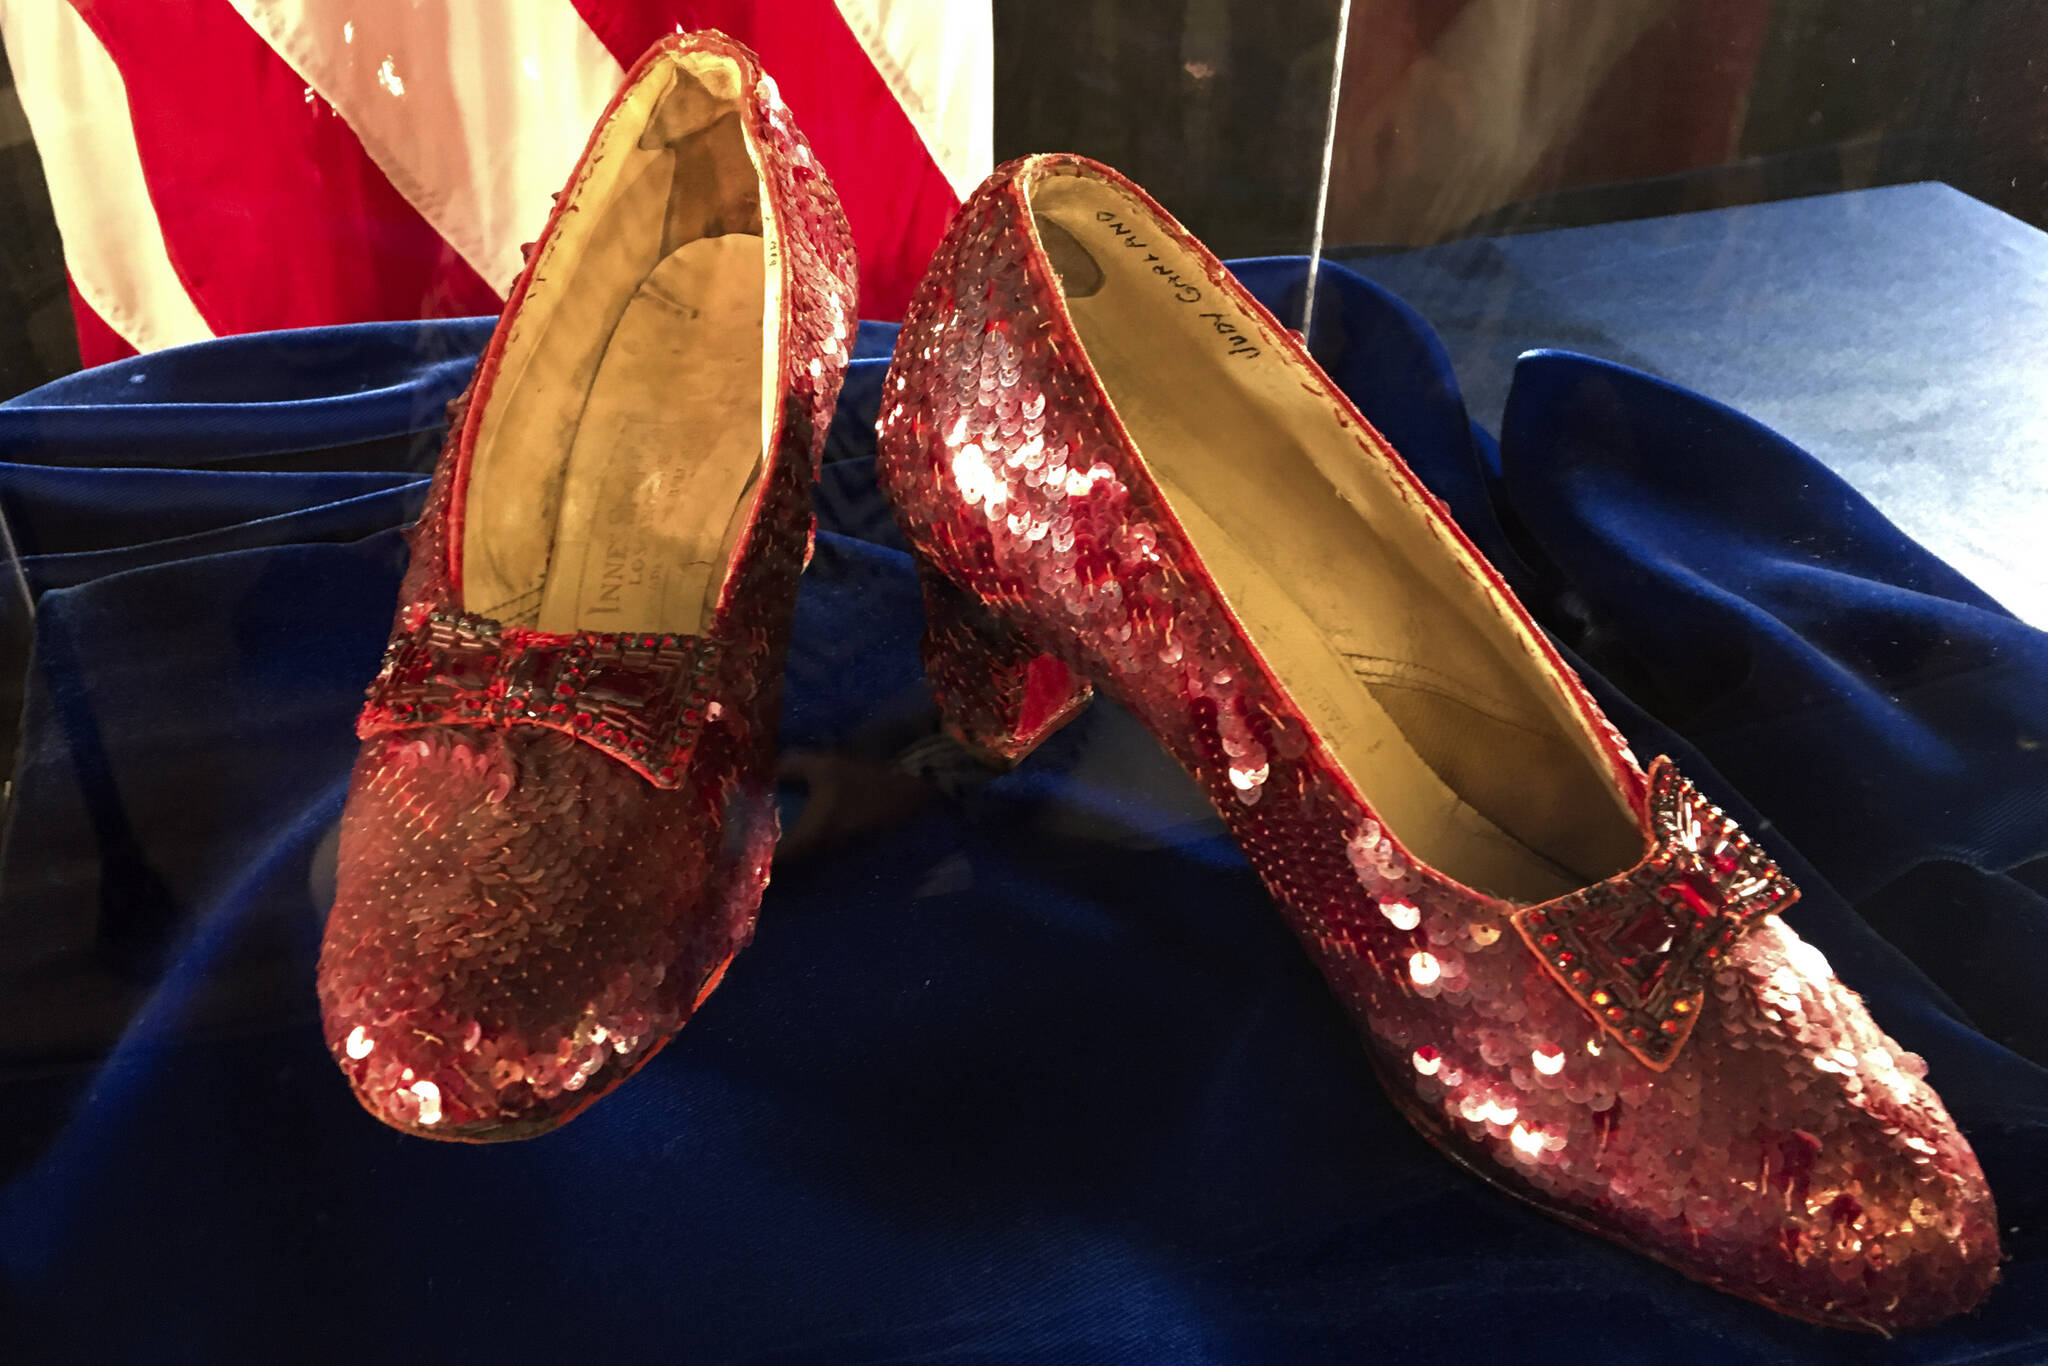 FILE - Ruby slippers once worn by Judy Garland in the “The Wizard of Oz” are displayed at a news conference on Sept. 4, 2018, at the FBI office in Brooklyn Center, Minn. Terry Jon Martin, the aging reformed mobster who has admitted stealing the slippers, gave into the temptation of “one last score” after an old mob associate led him to believe the famous shoes must be adorned with real jewels to justify their $1 million insured value according to a new memo filed ahead of his Monday, Jan. 29, 2024, sentencing in Duluth, Minn. (AP Photo/Jeff Baenen, File)